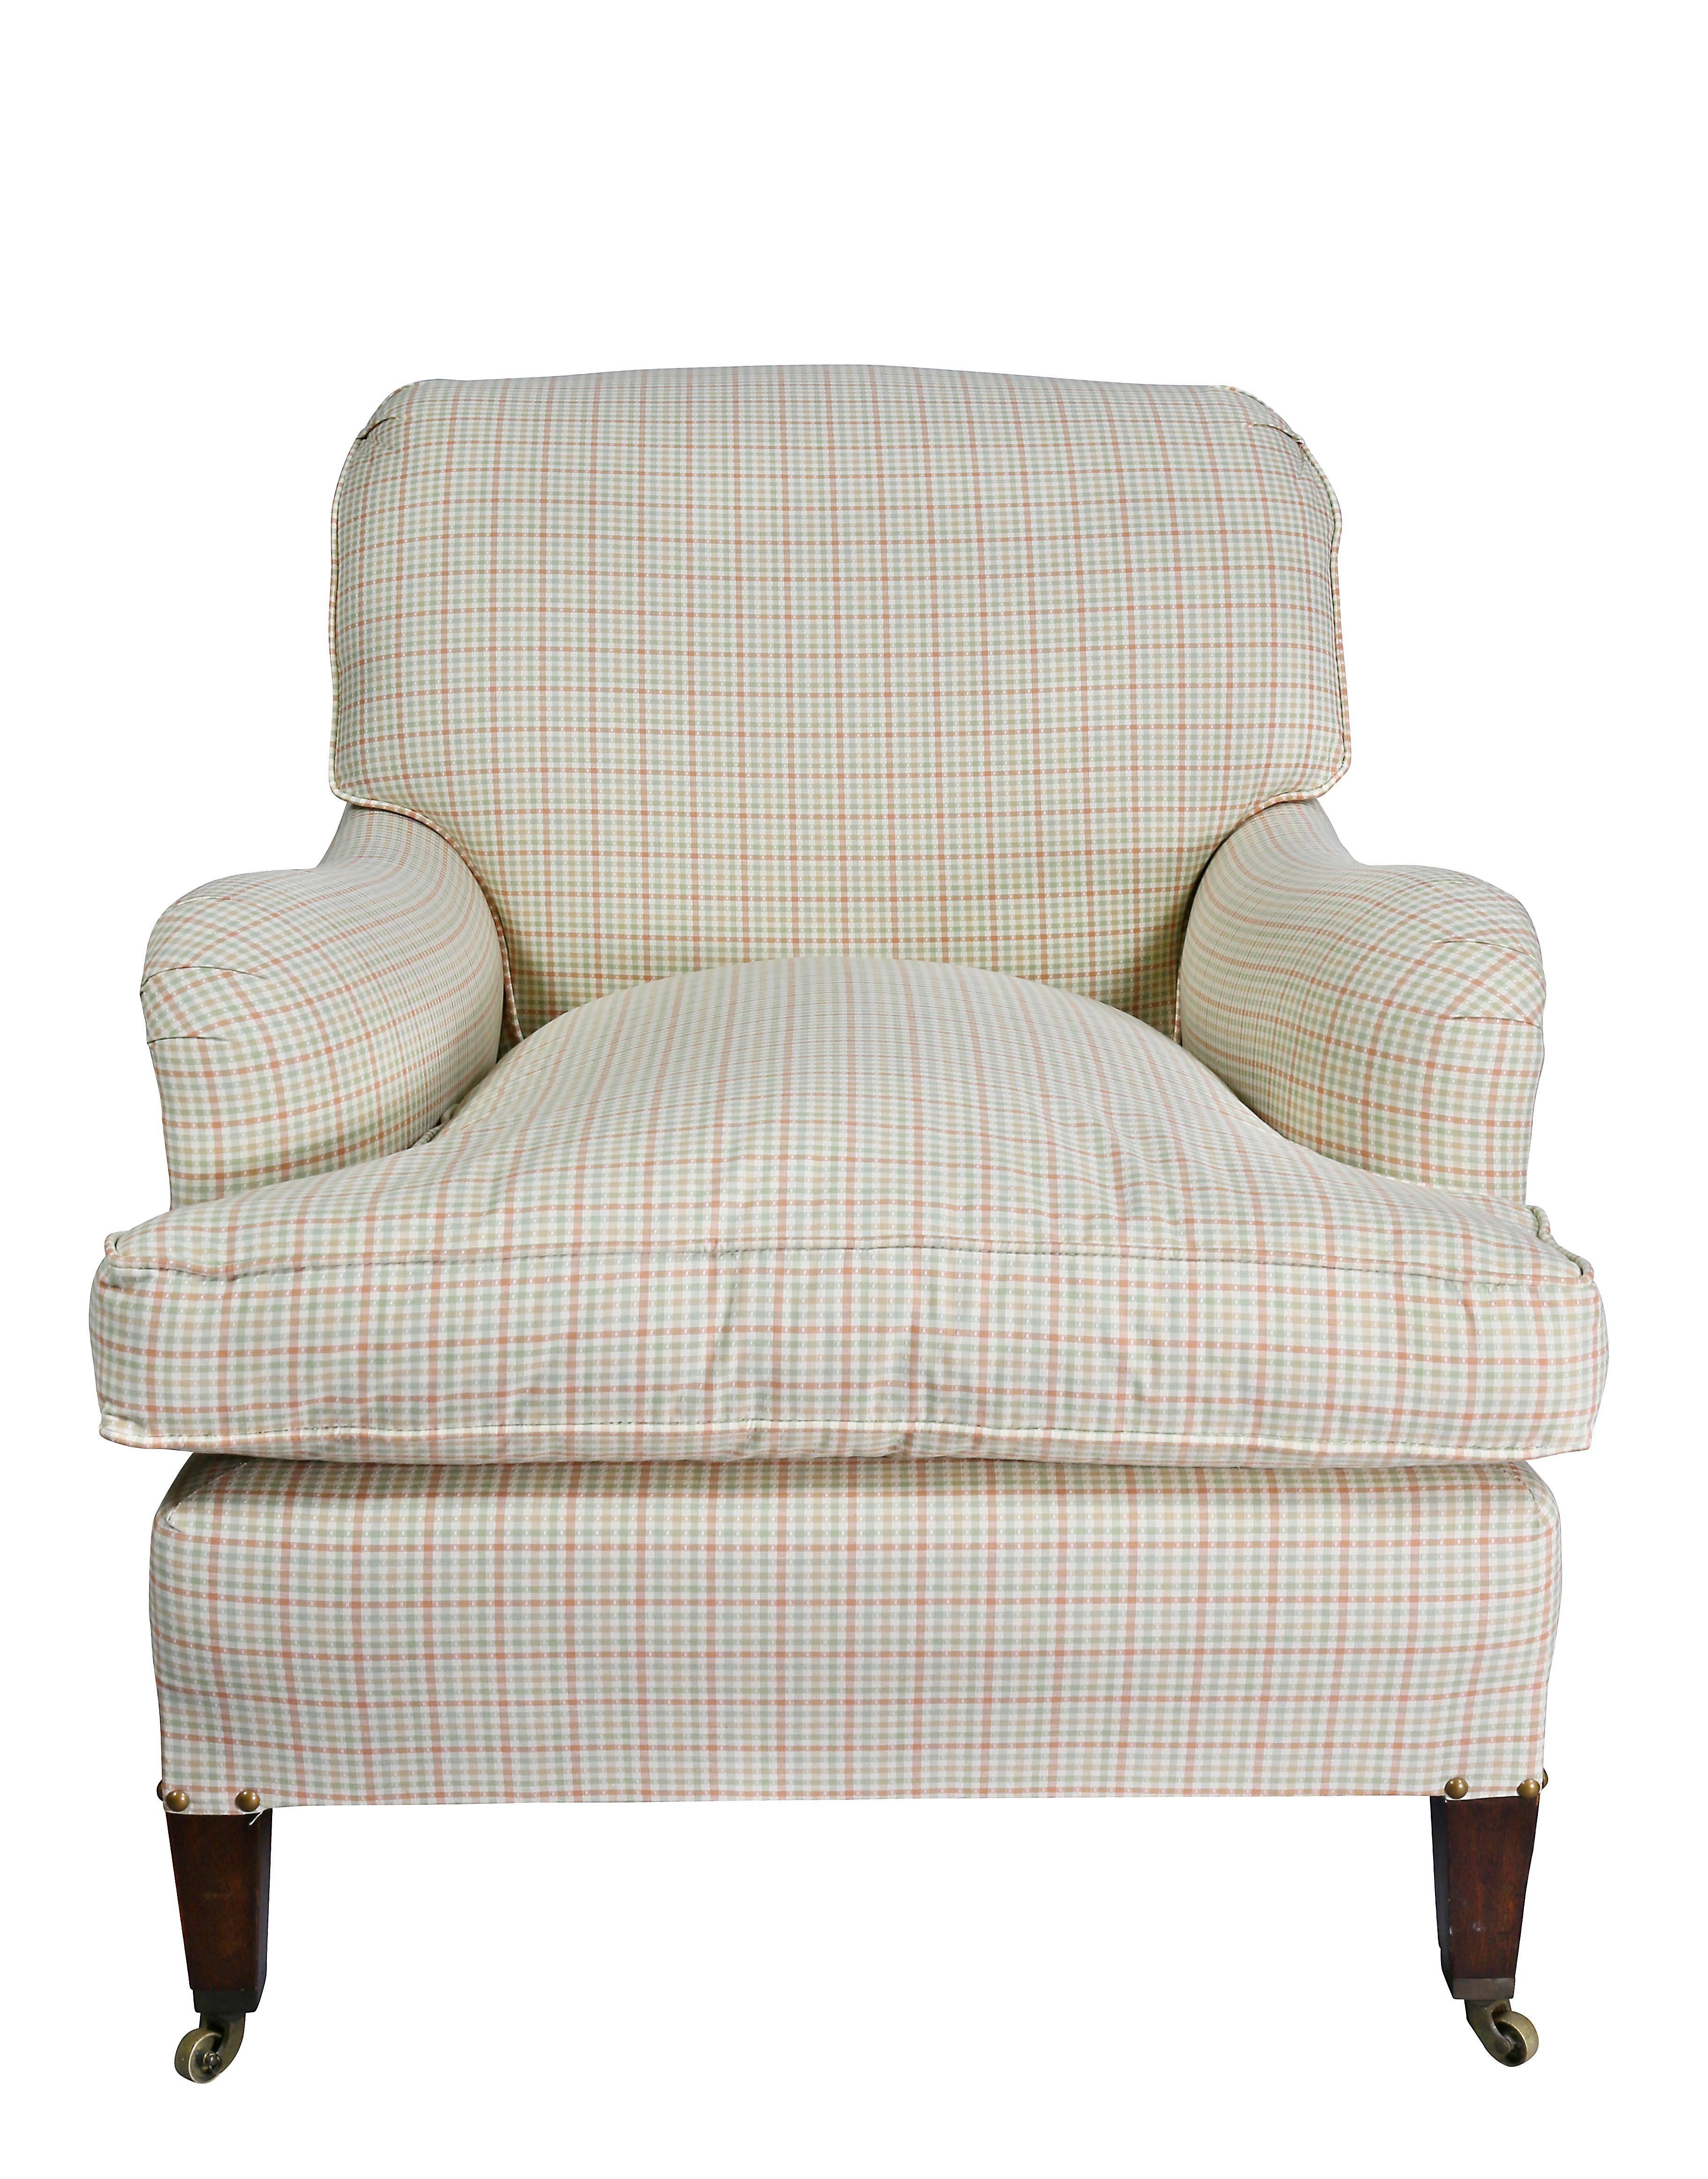 Upholstered scrolled back and shaped arms, loose cushion, square tapered legs with brass casters.